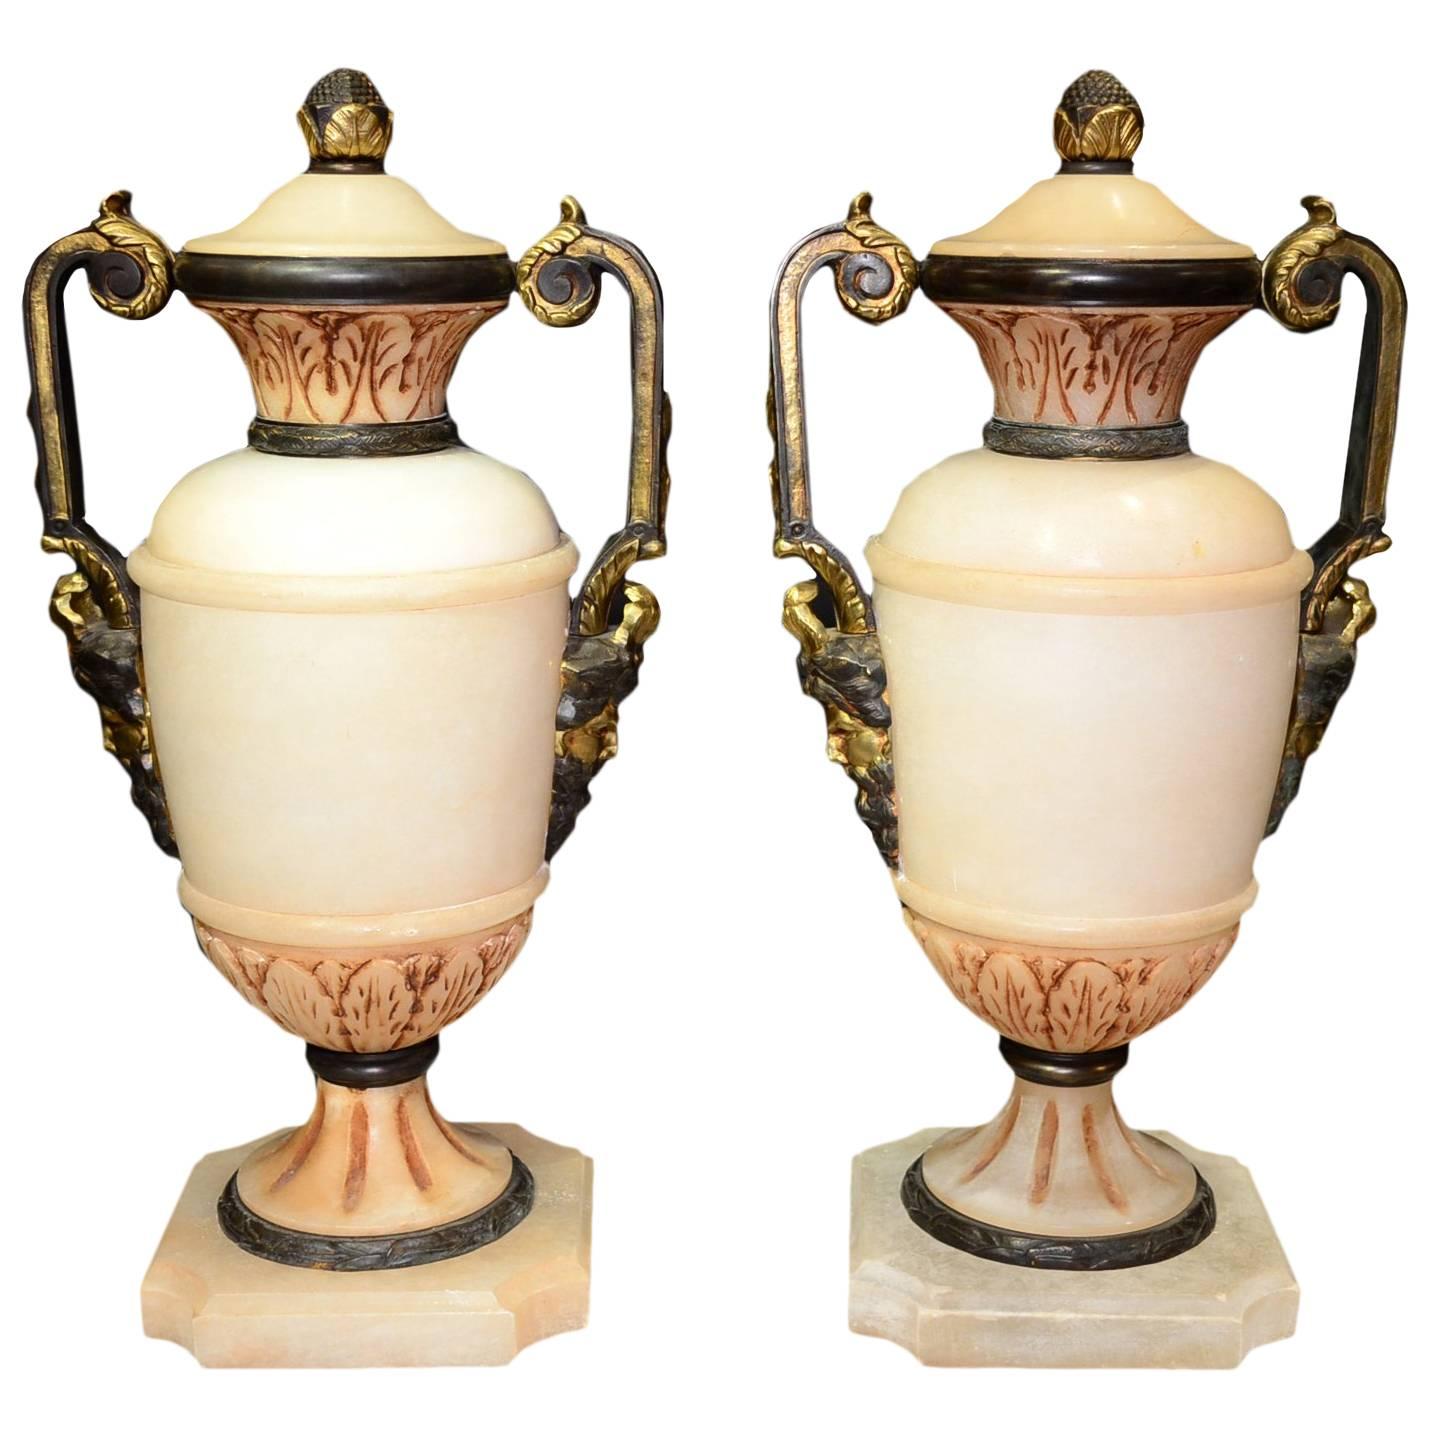 Neoclassical Pair of Carved Alabaster and Bronze Urns with Mask Face Handles